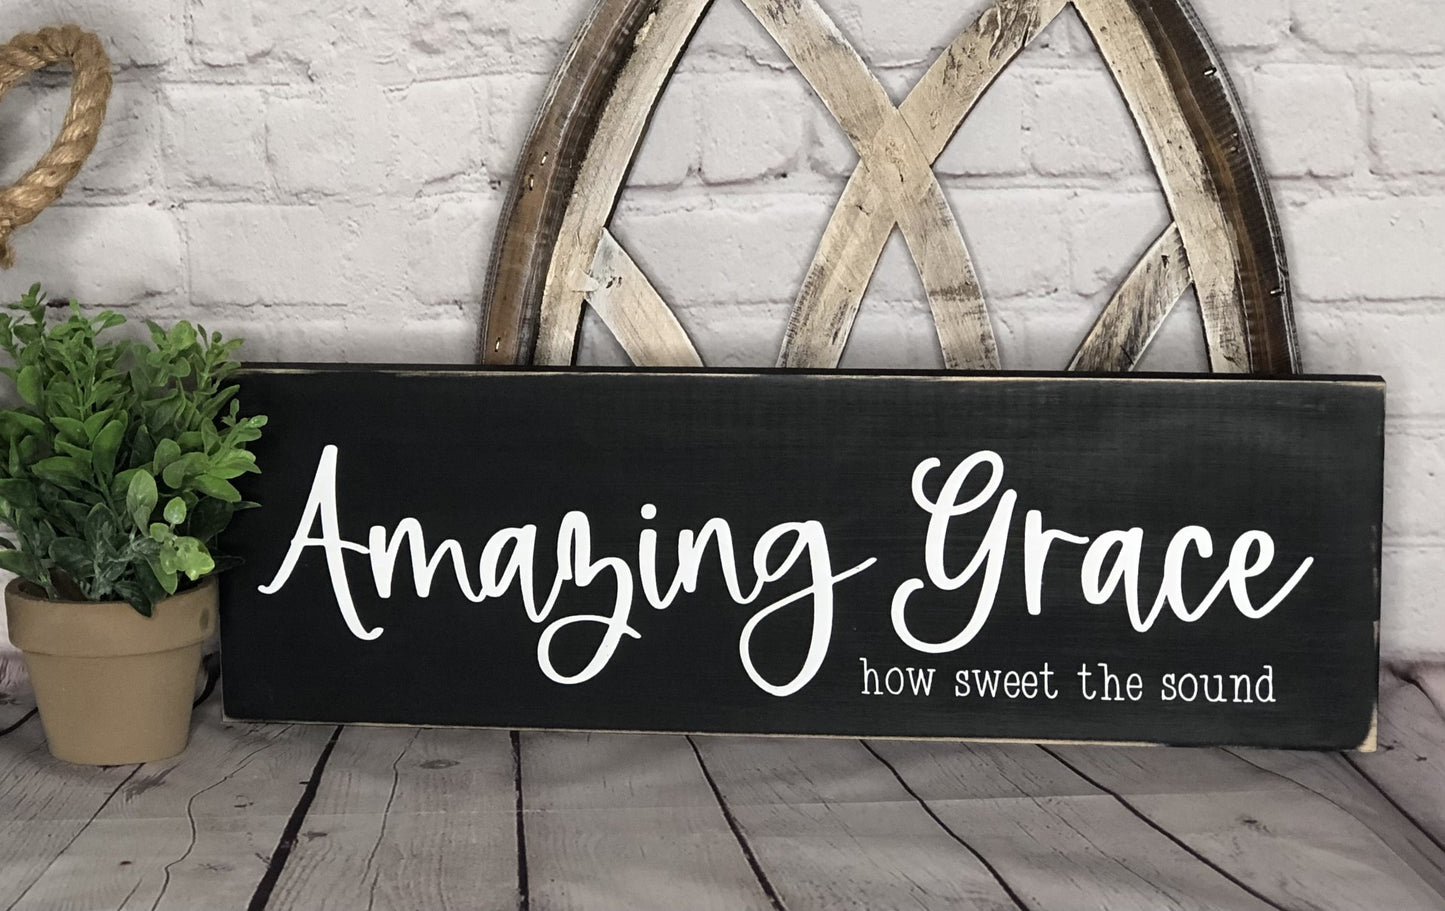 AMAZING GRACE HOW SWEET THE SOUND- WOOD SIGN